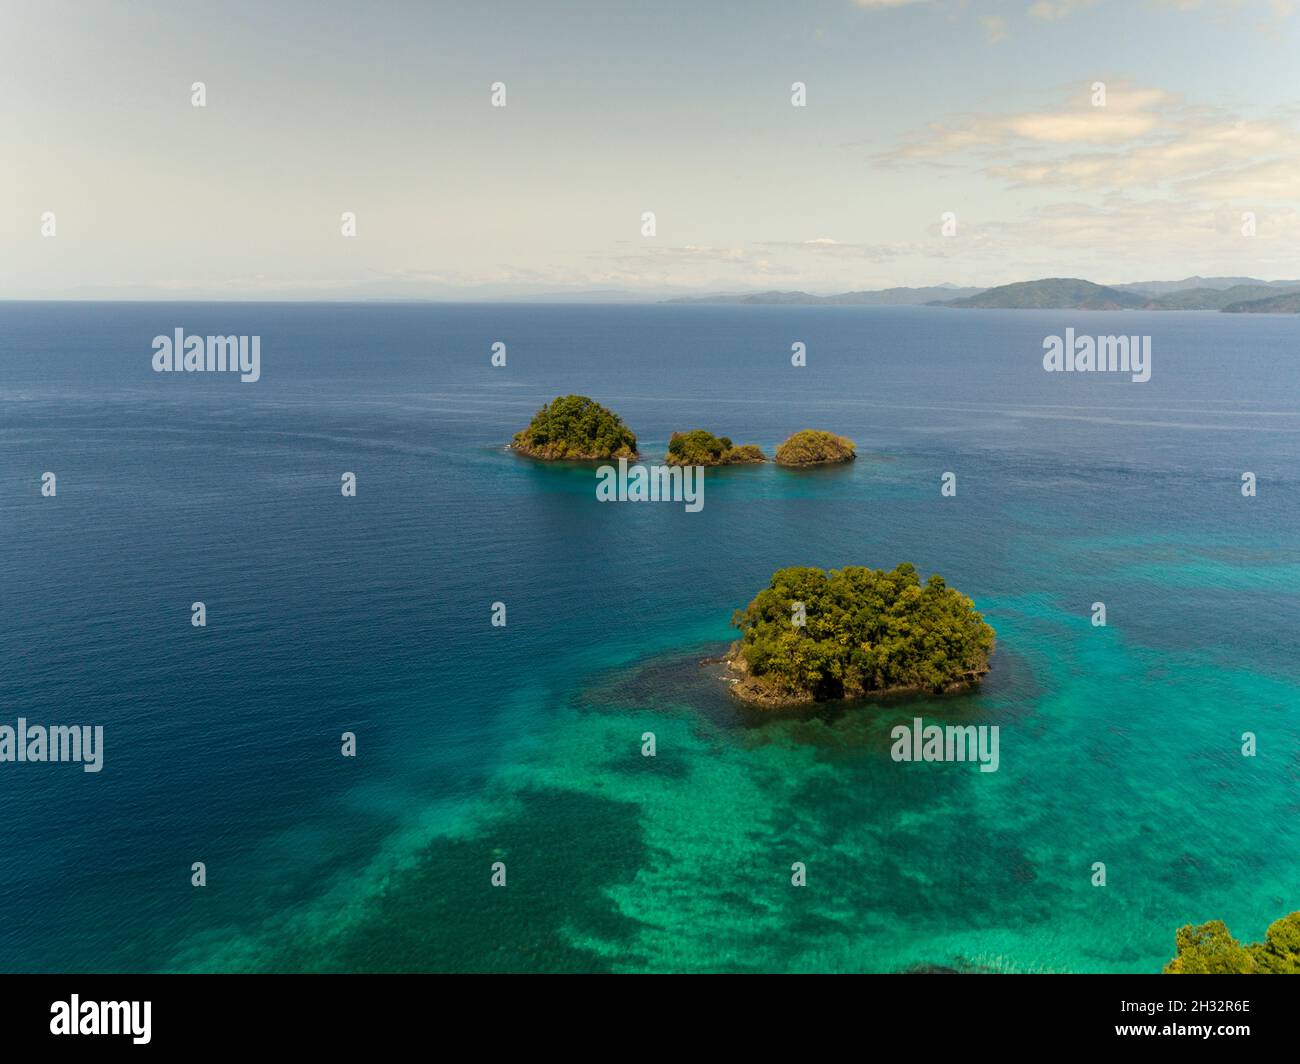 Aerial view of  Canales de Afuera island, A place for snorkeling, scuba diving, kayaking, swimming, Coiba  National Park, Panama, Central America Stock Photo